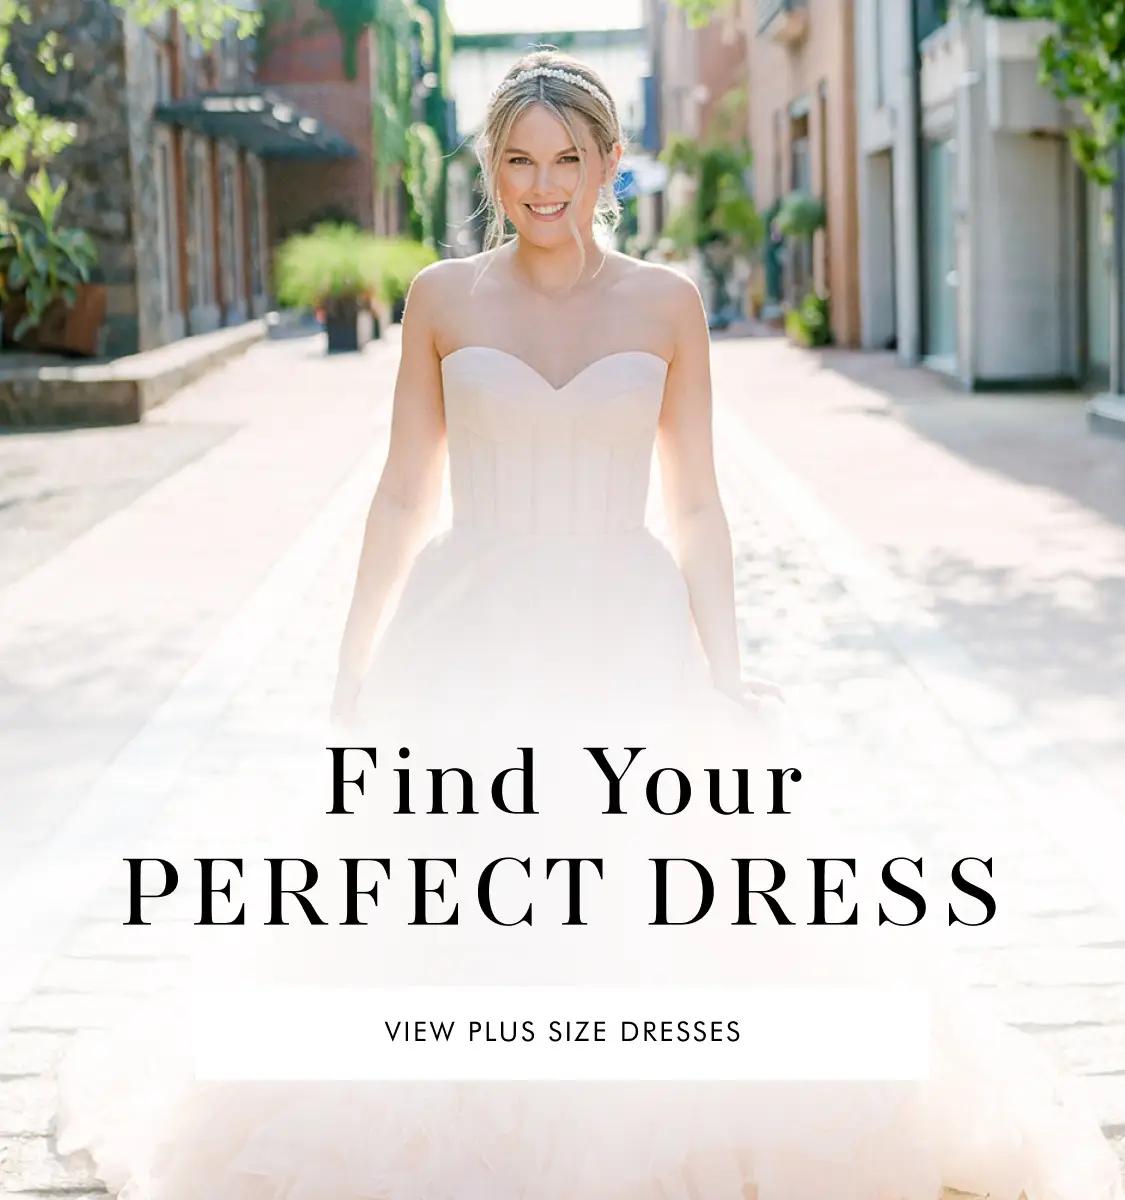 Find your perfect dress mobile